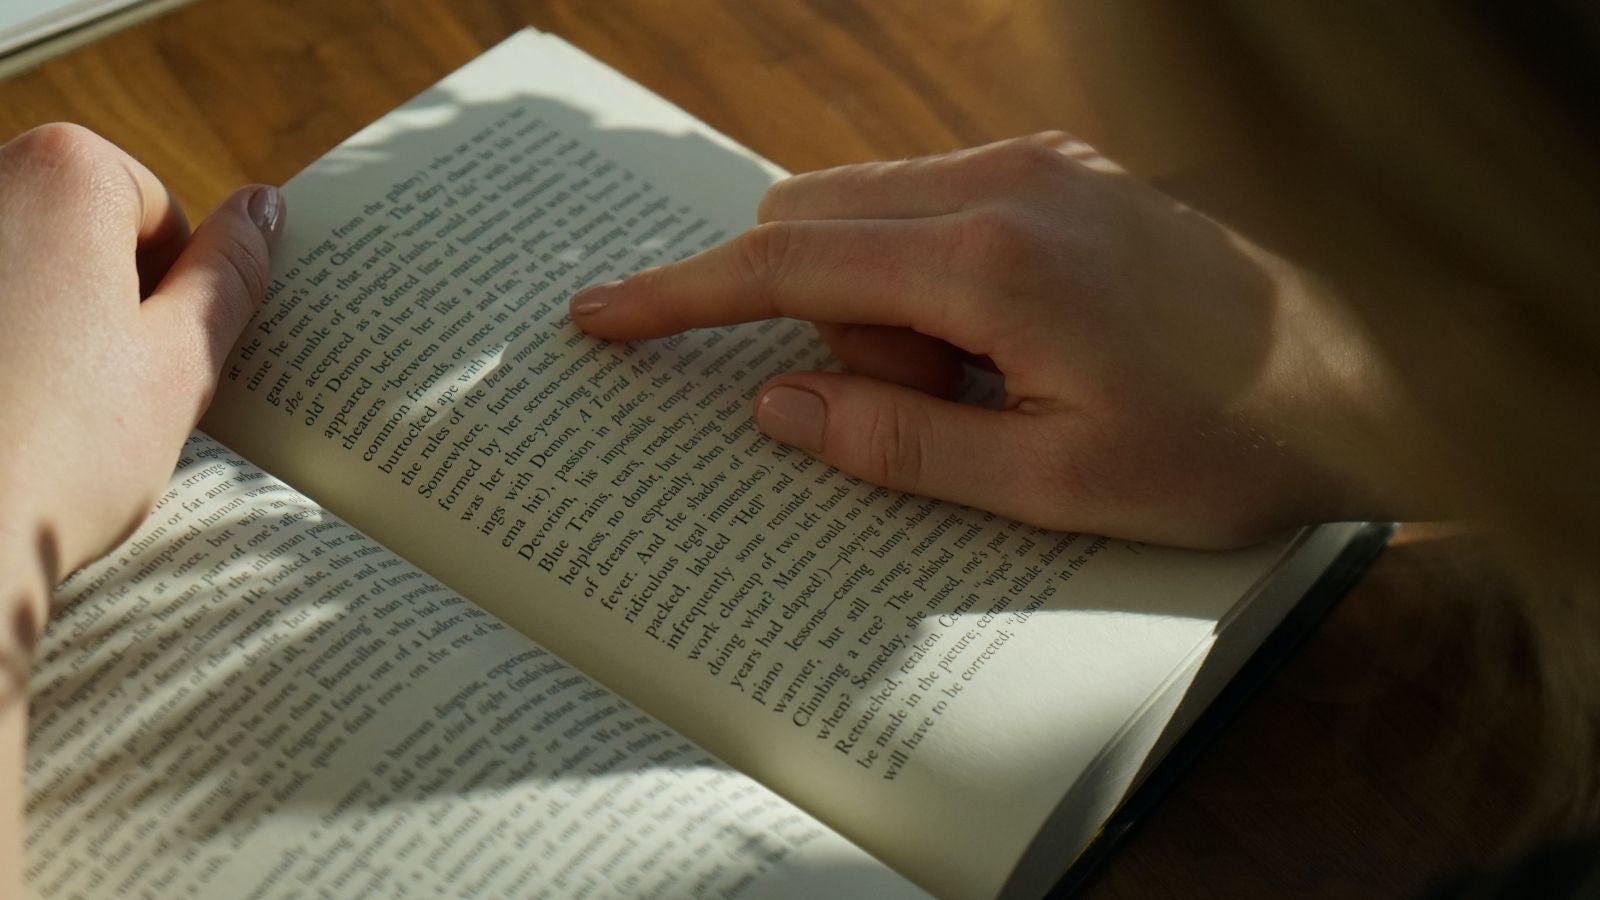 Close up of person's hands on an open book